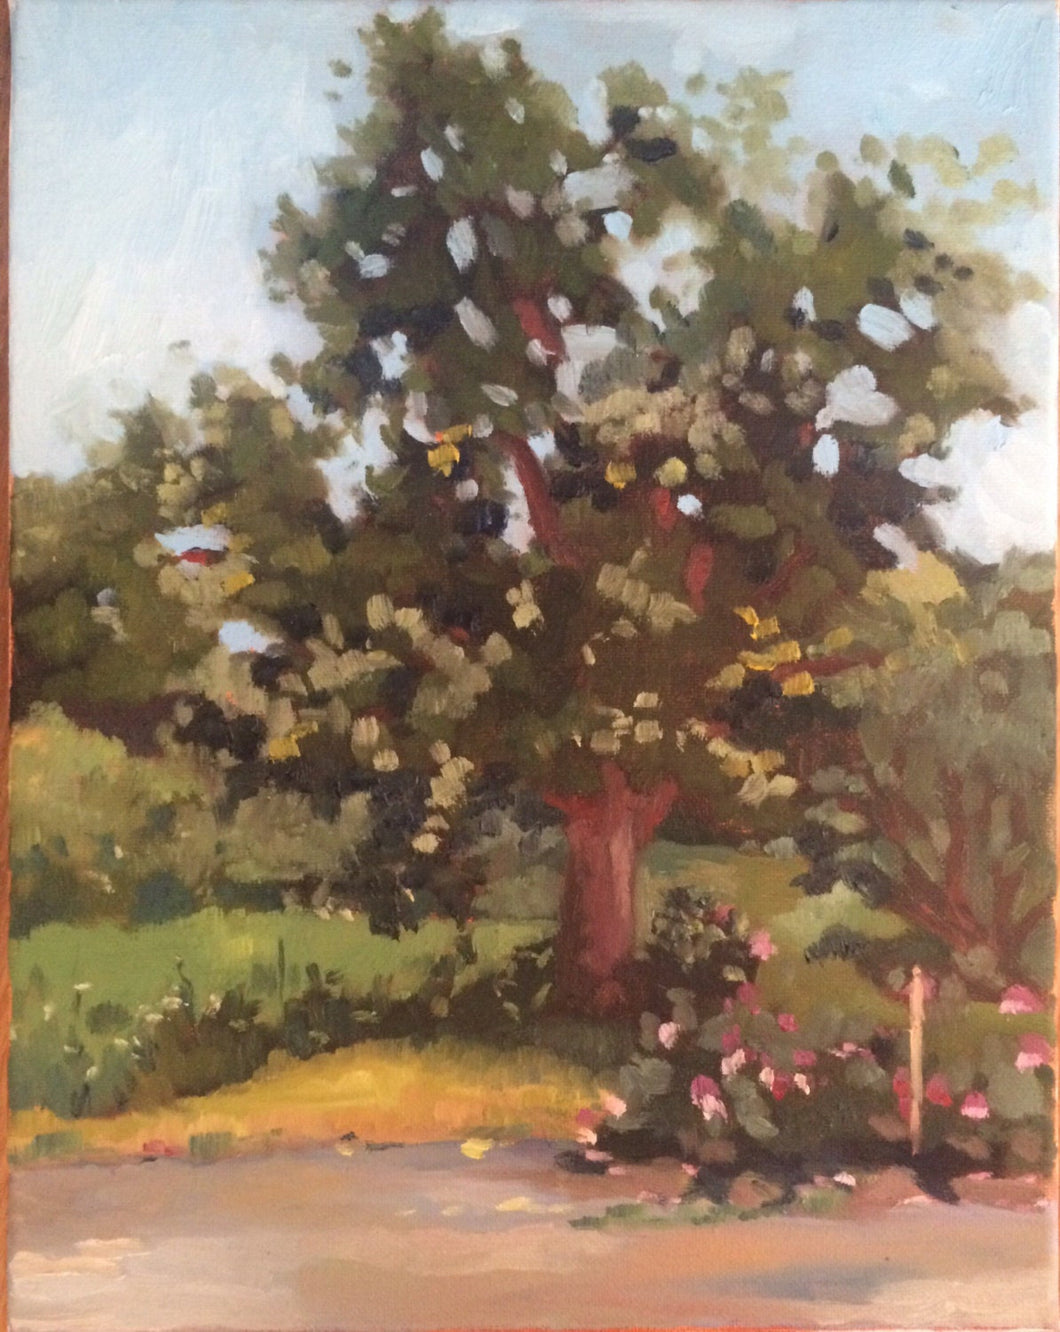 Landscape Oil Painting Plein Air on Canvas, Original art, home decoration, wedding gifts art, Trees and flowers at Harvard Arnold Arboretum